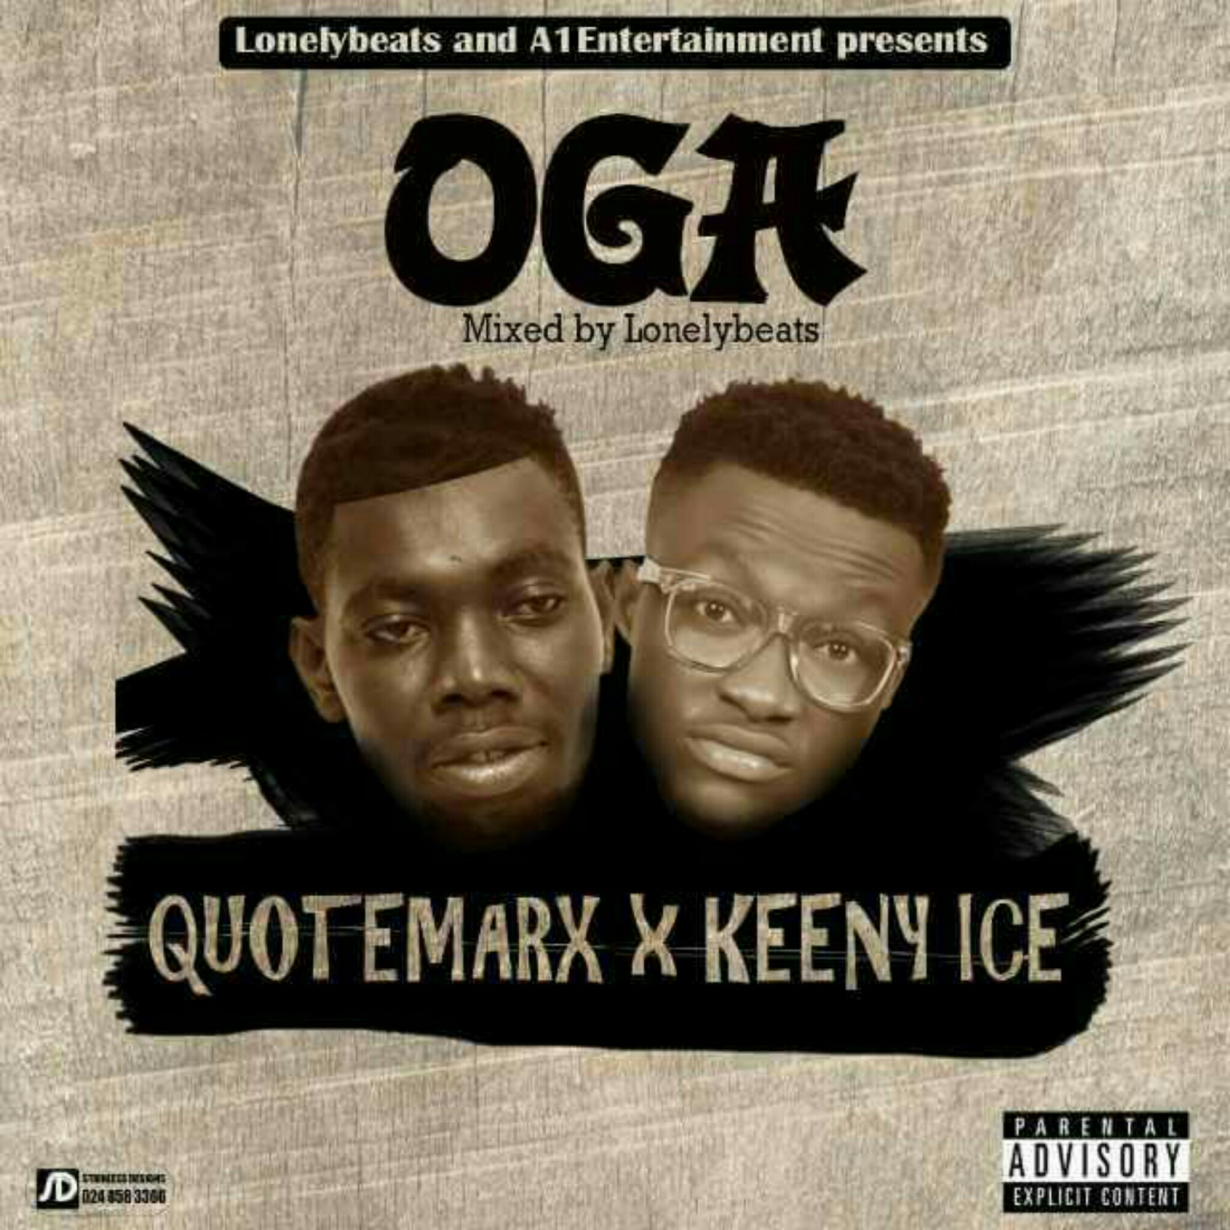 Quotemax – Oga ft Keeny ice